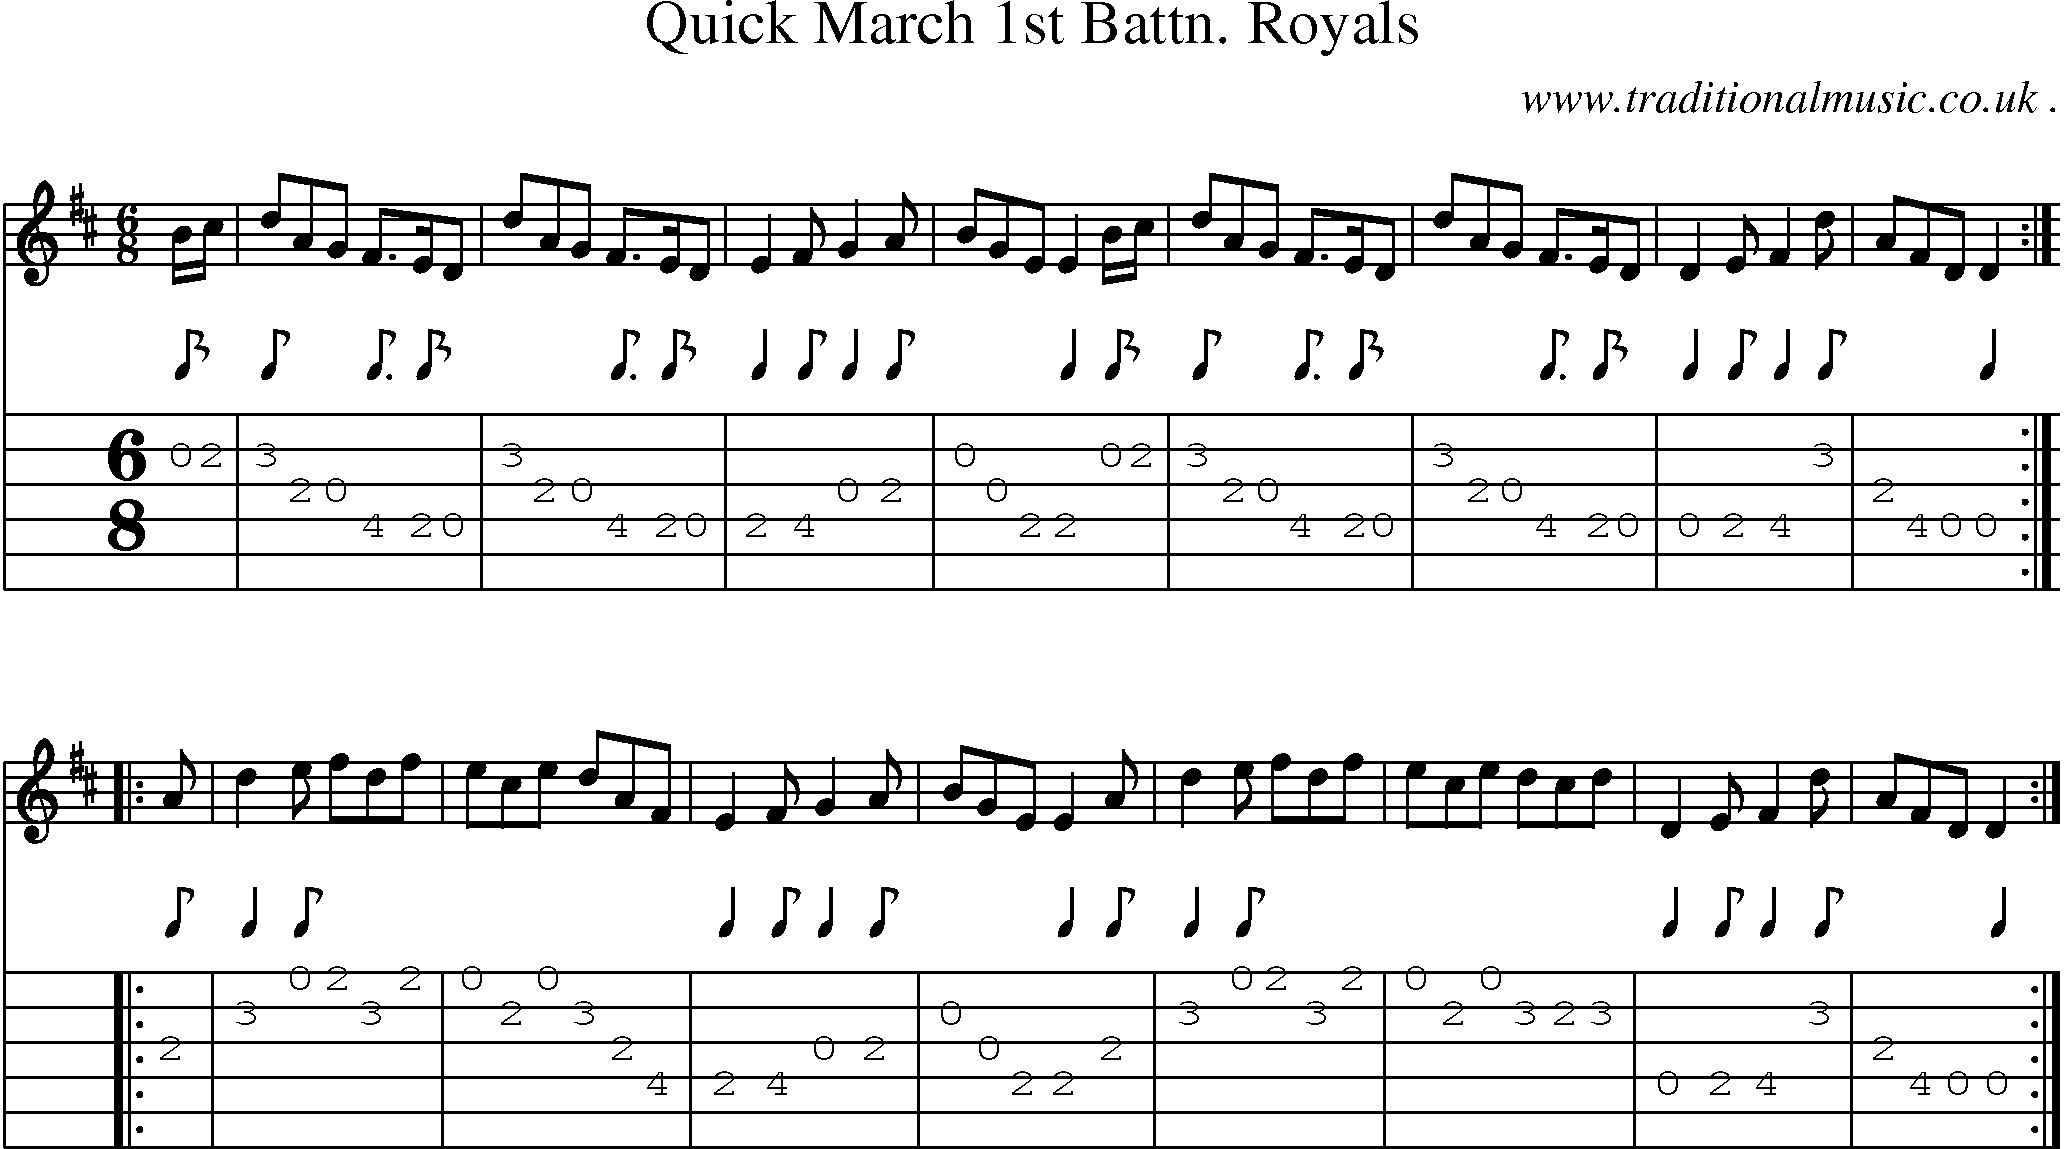 Sheet-Music and Guitar Tabs for Quick March 1st Battn Royals